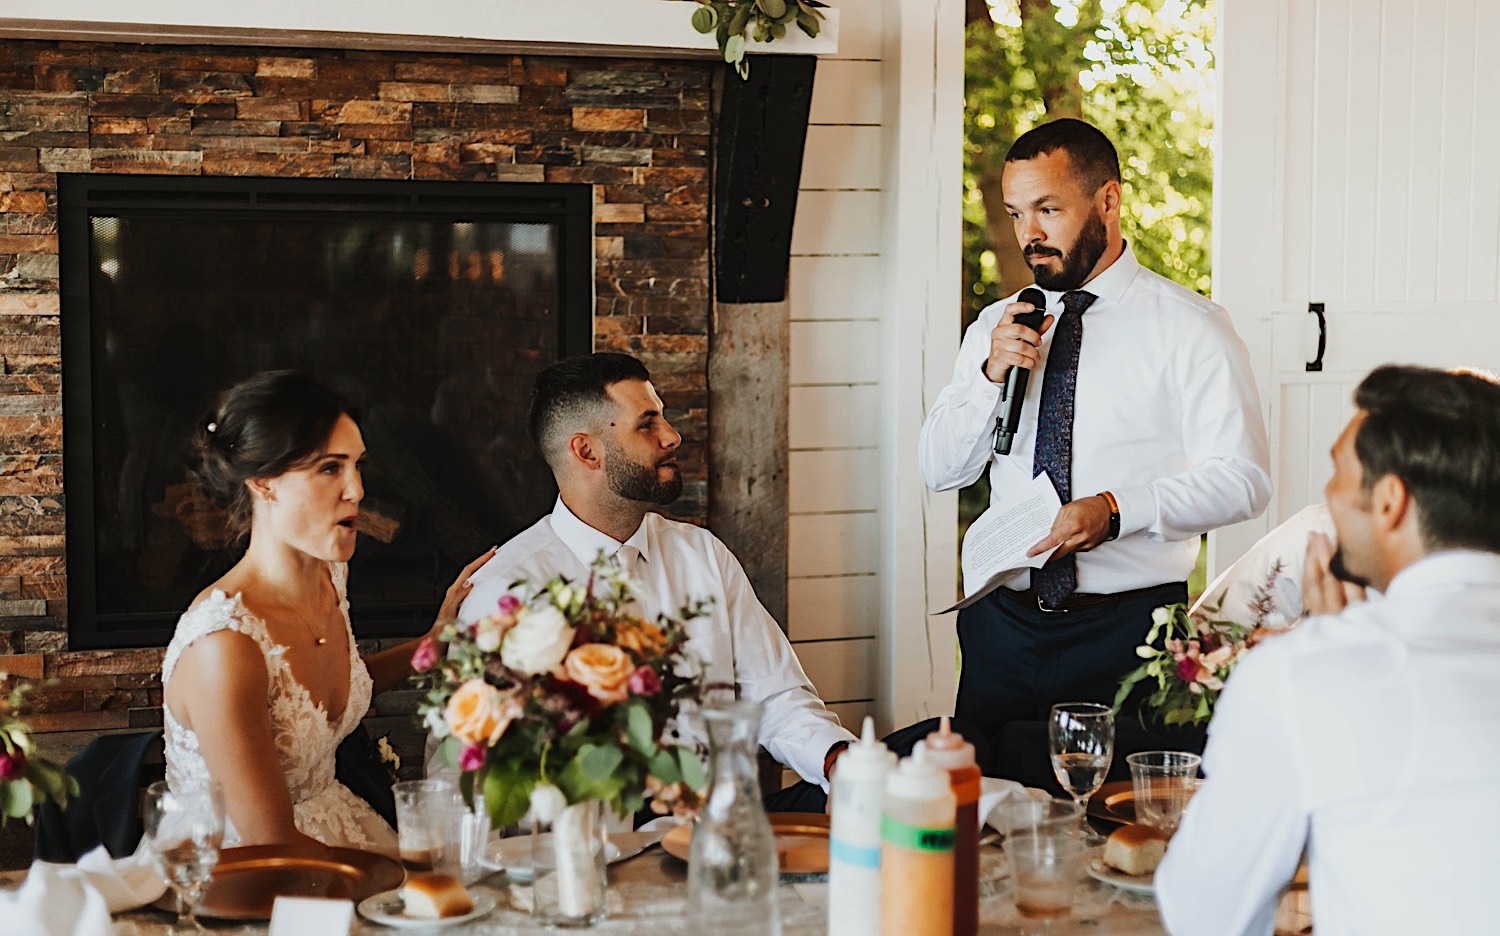 A bride and groom listen and sit next to one another while a groomsman gives a speech during their wedding reception at Legacy Hill Farm